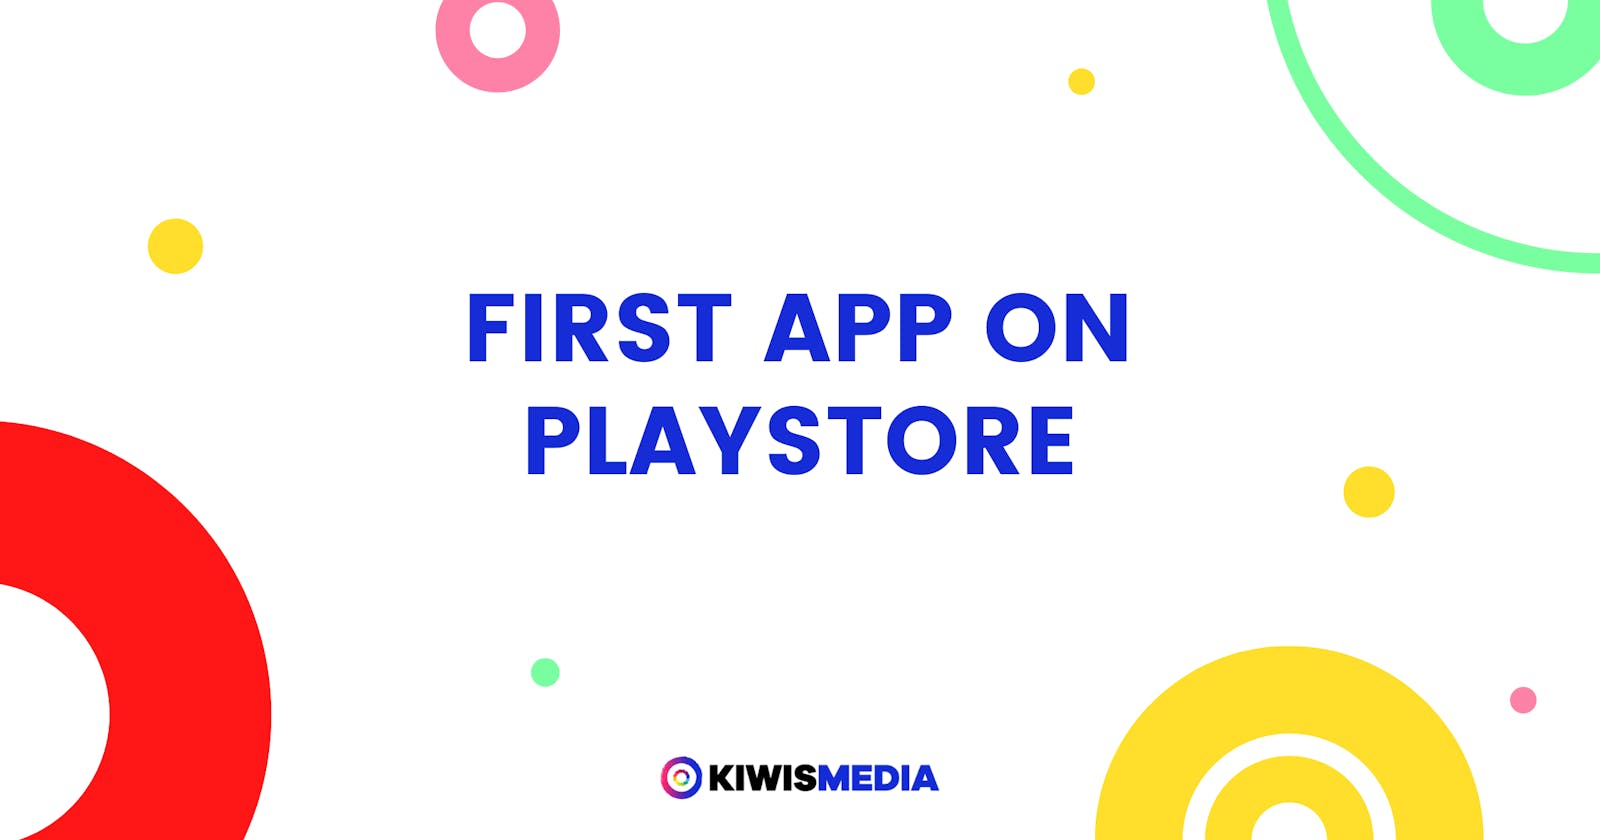 First App on Playstore